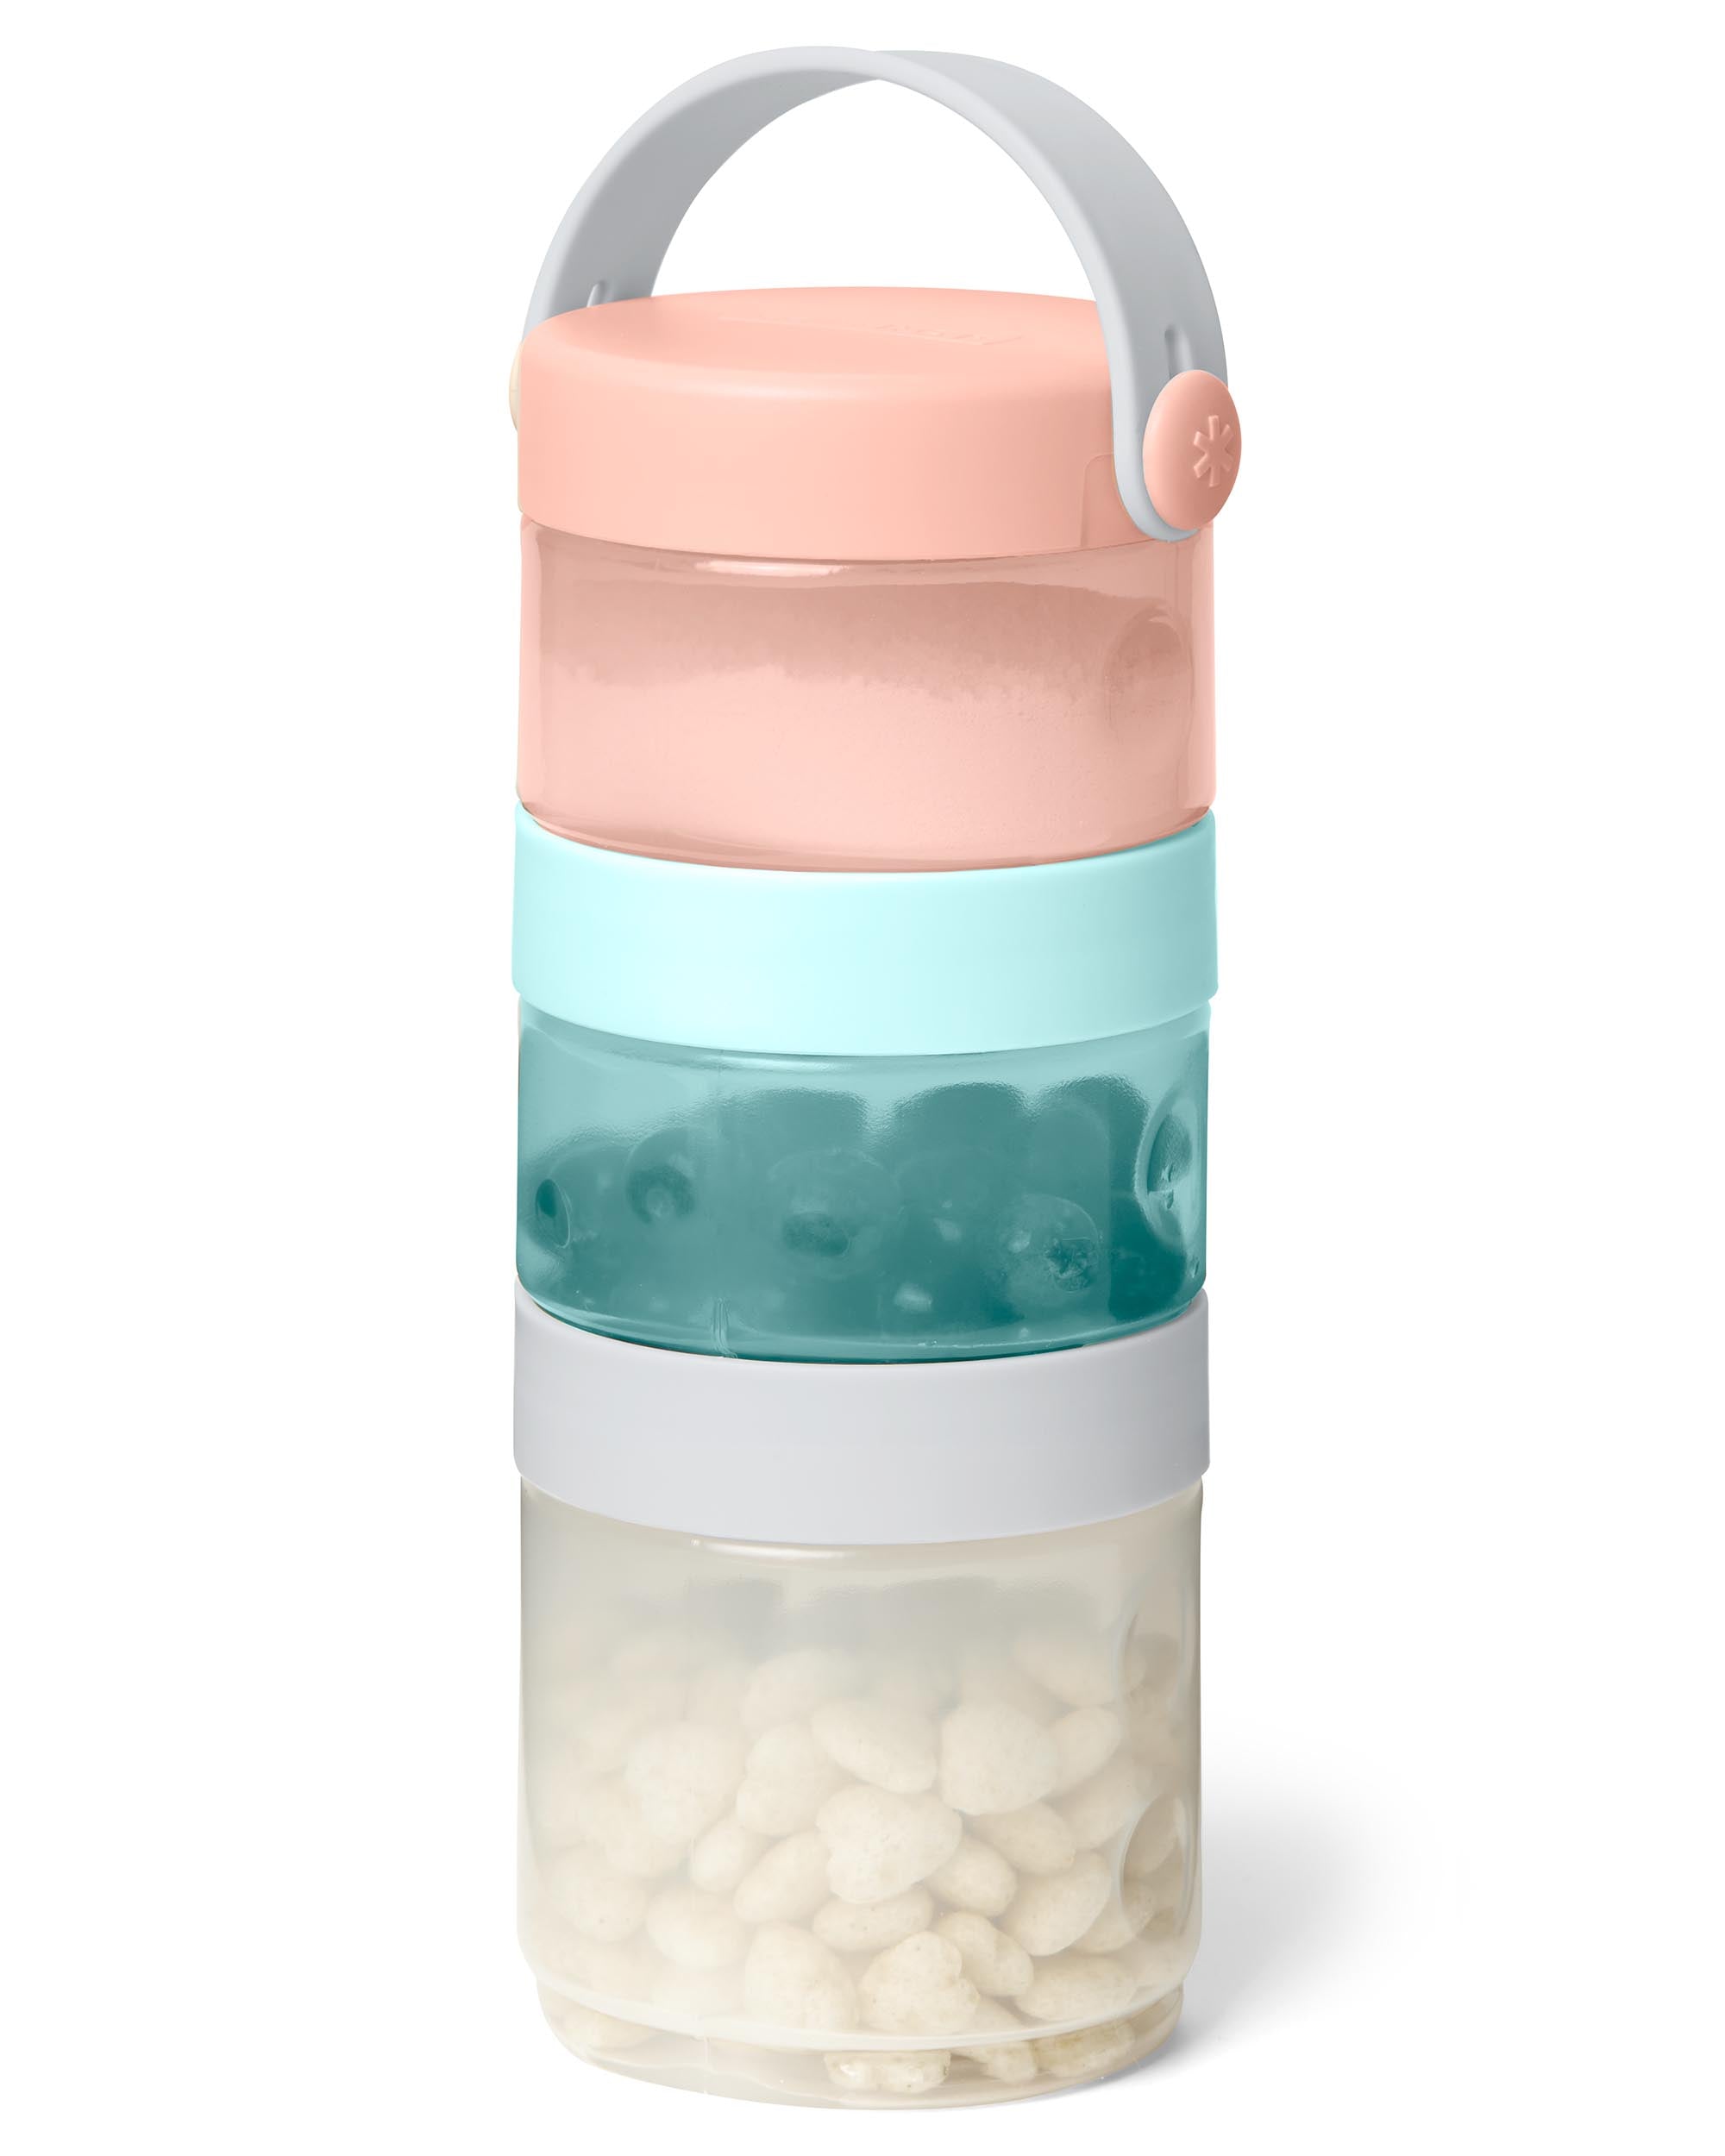 Food to Formula Container Set